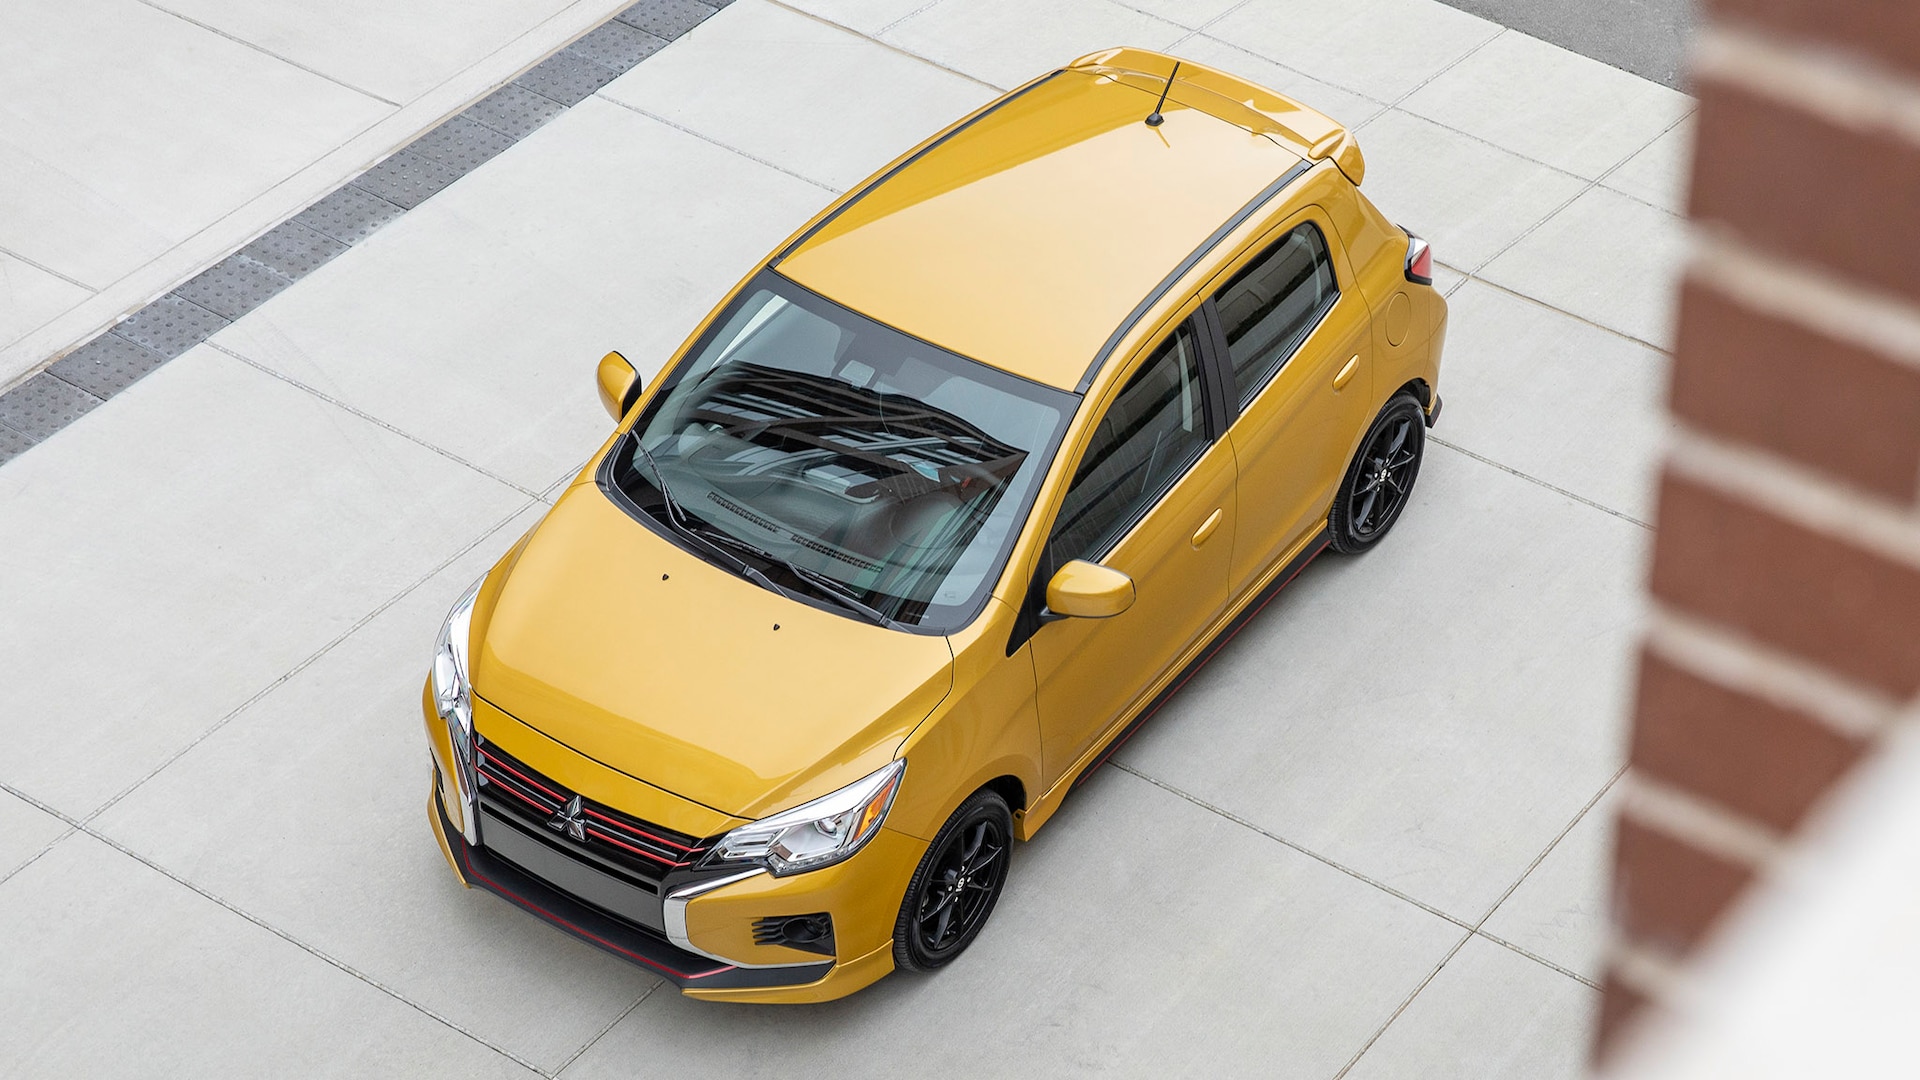 2022 Mitsubishi Mirage Prices, Reviews, and Photos - MotorTrend